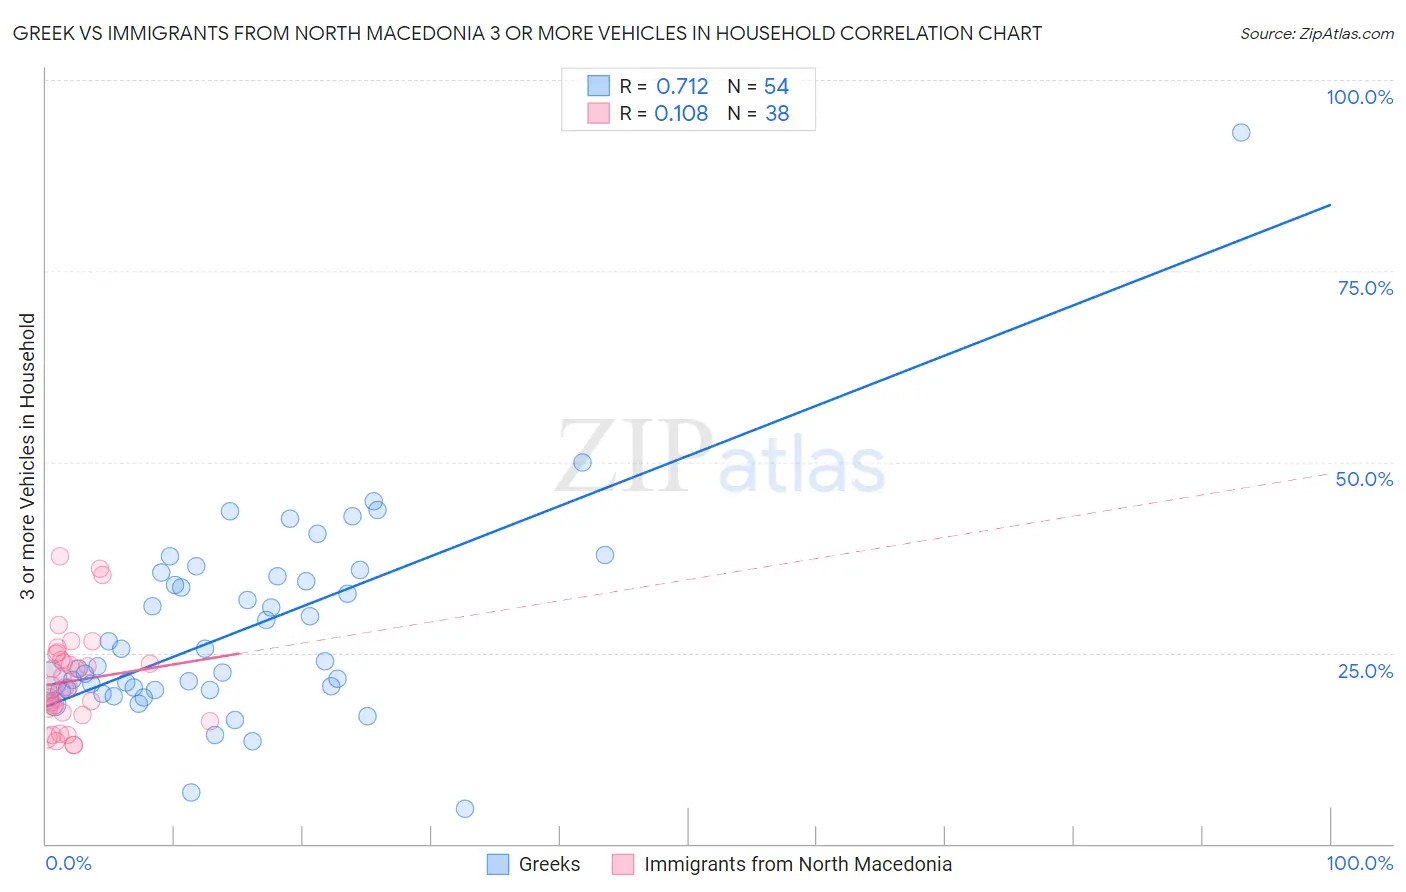 Greek vs Immigrants from North Macedonia 3 or more Vehicles in Household